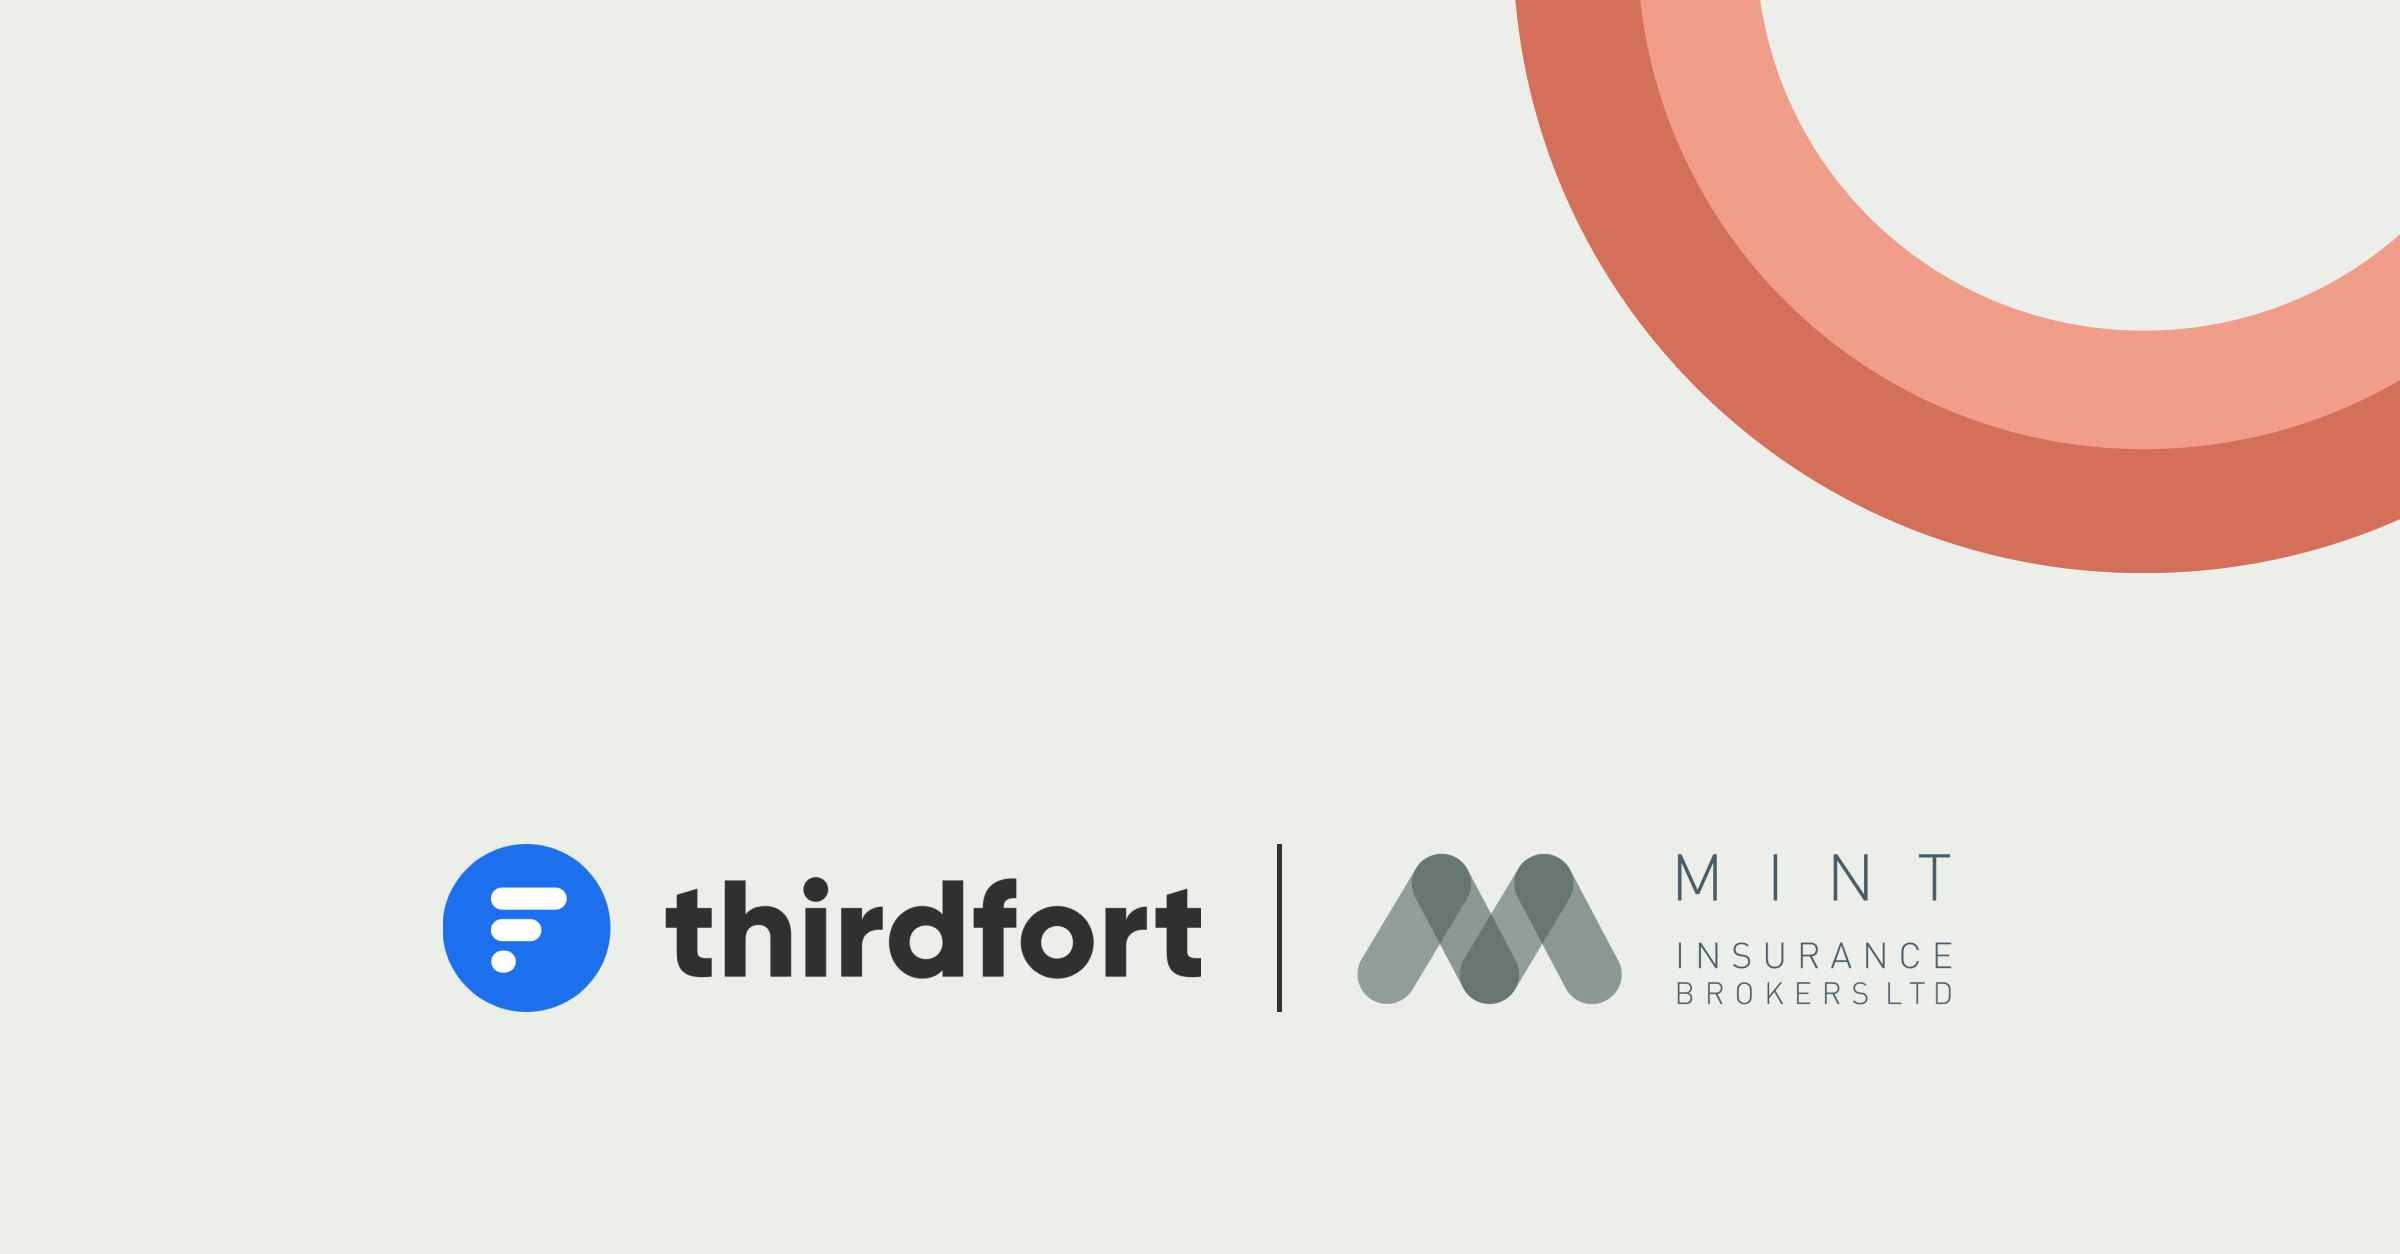 Thirdfort logo and Mint Insurance Brokers Ltd logos on a grey background with a peach semi circle graphic on the right